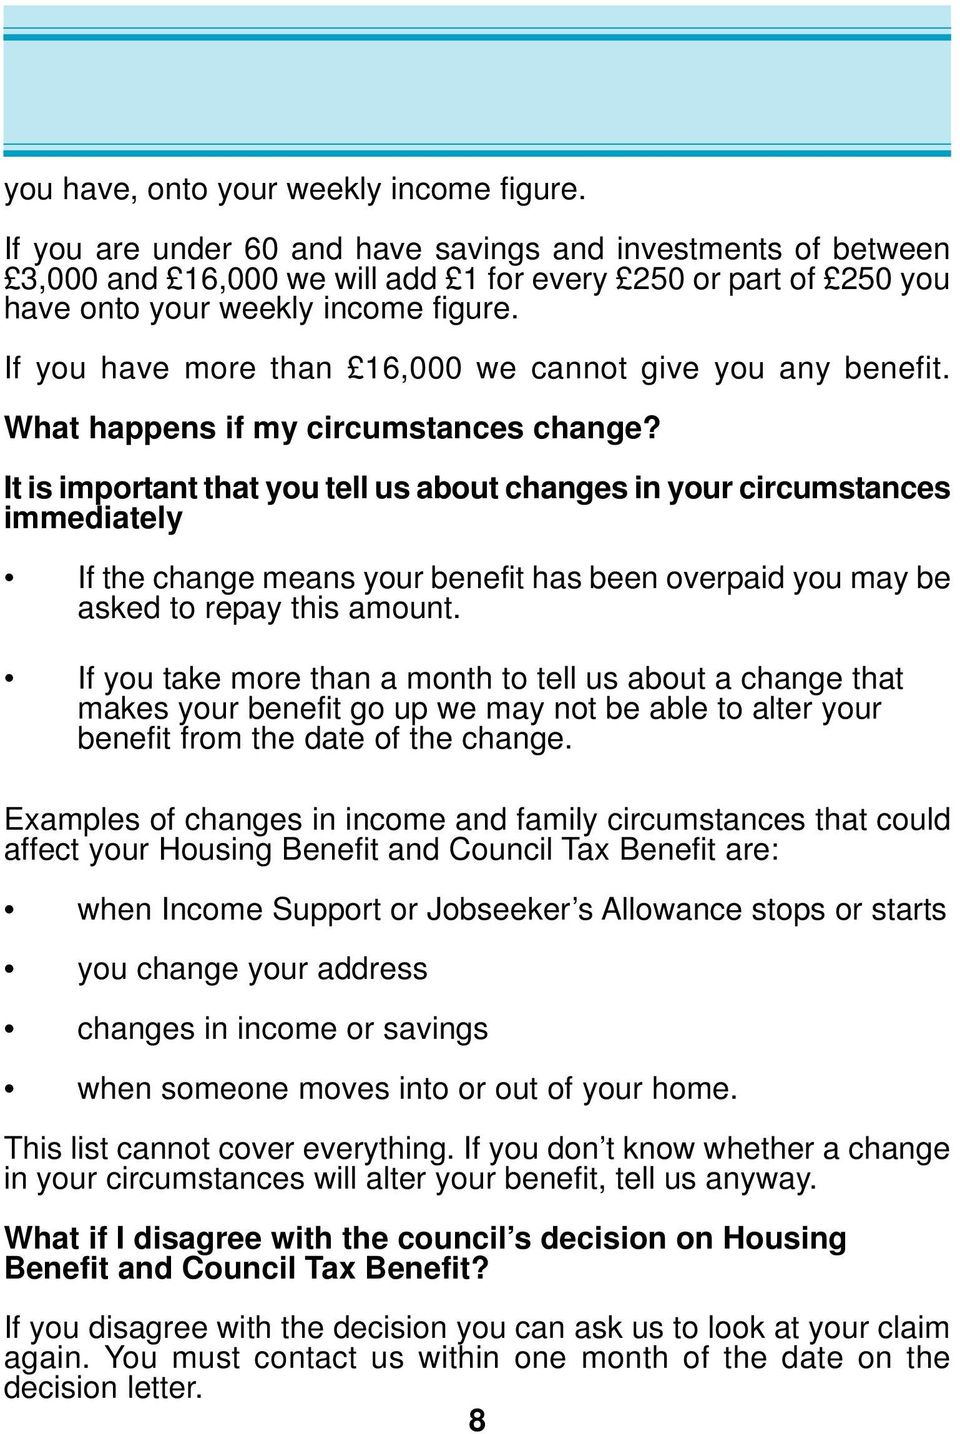 If you have more than 16,000 we cannot give you any benefit. What happens if my circumstances change?